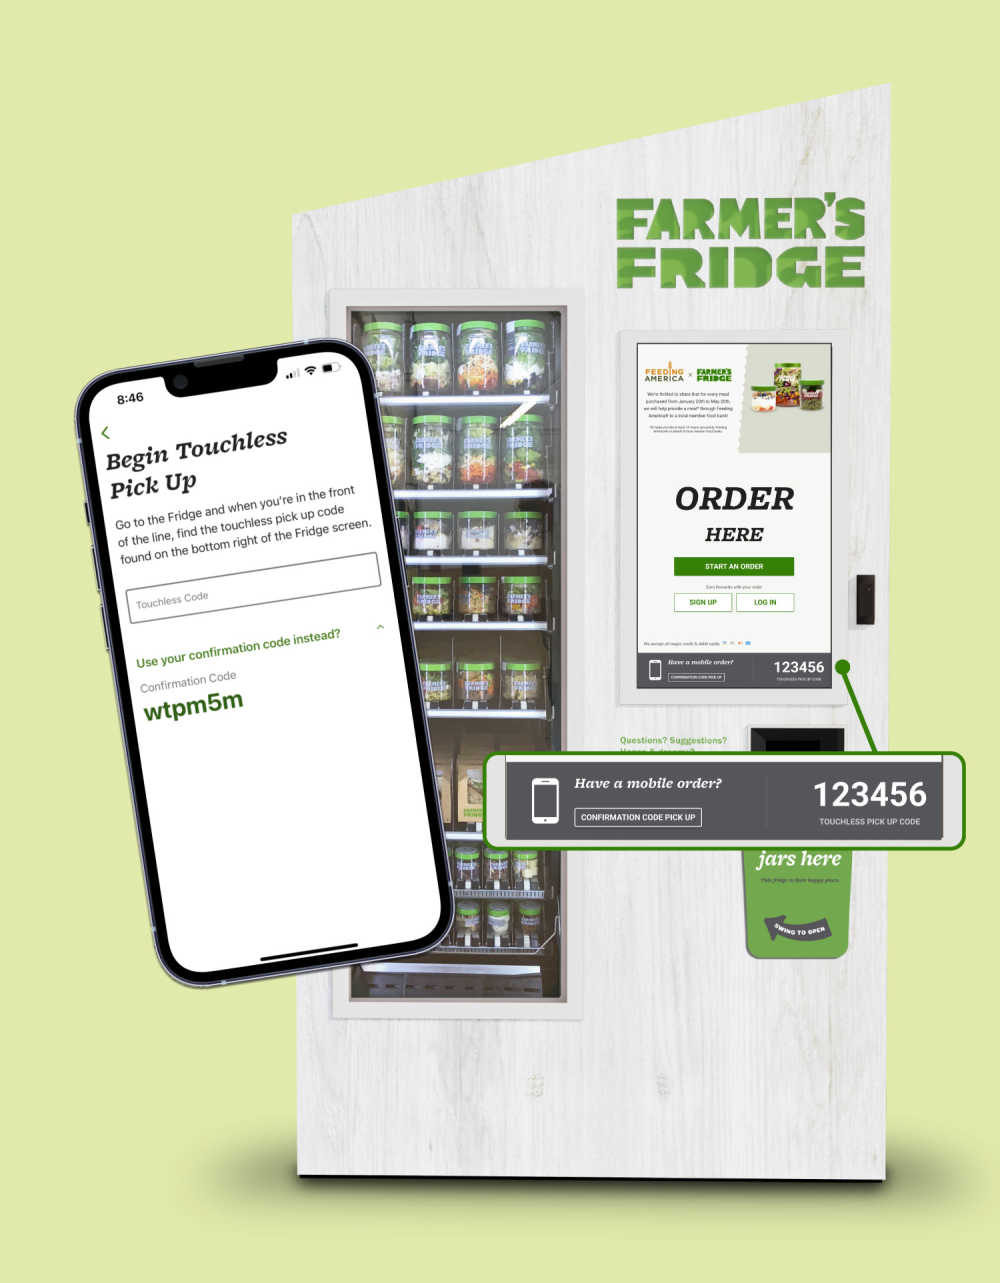 A Farmer's Fridge next to a phone showing the FF app.